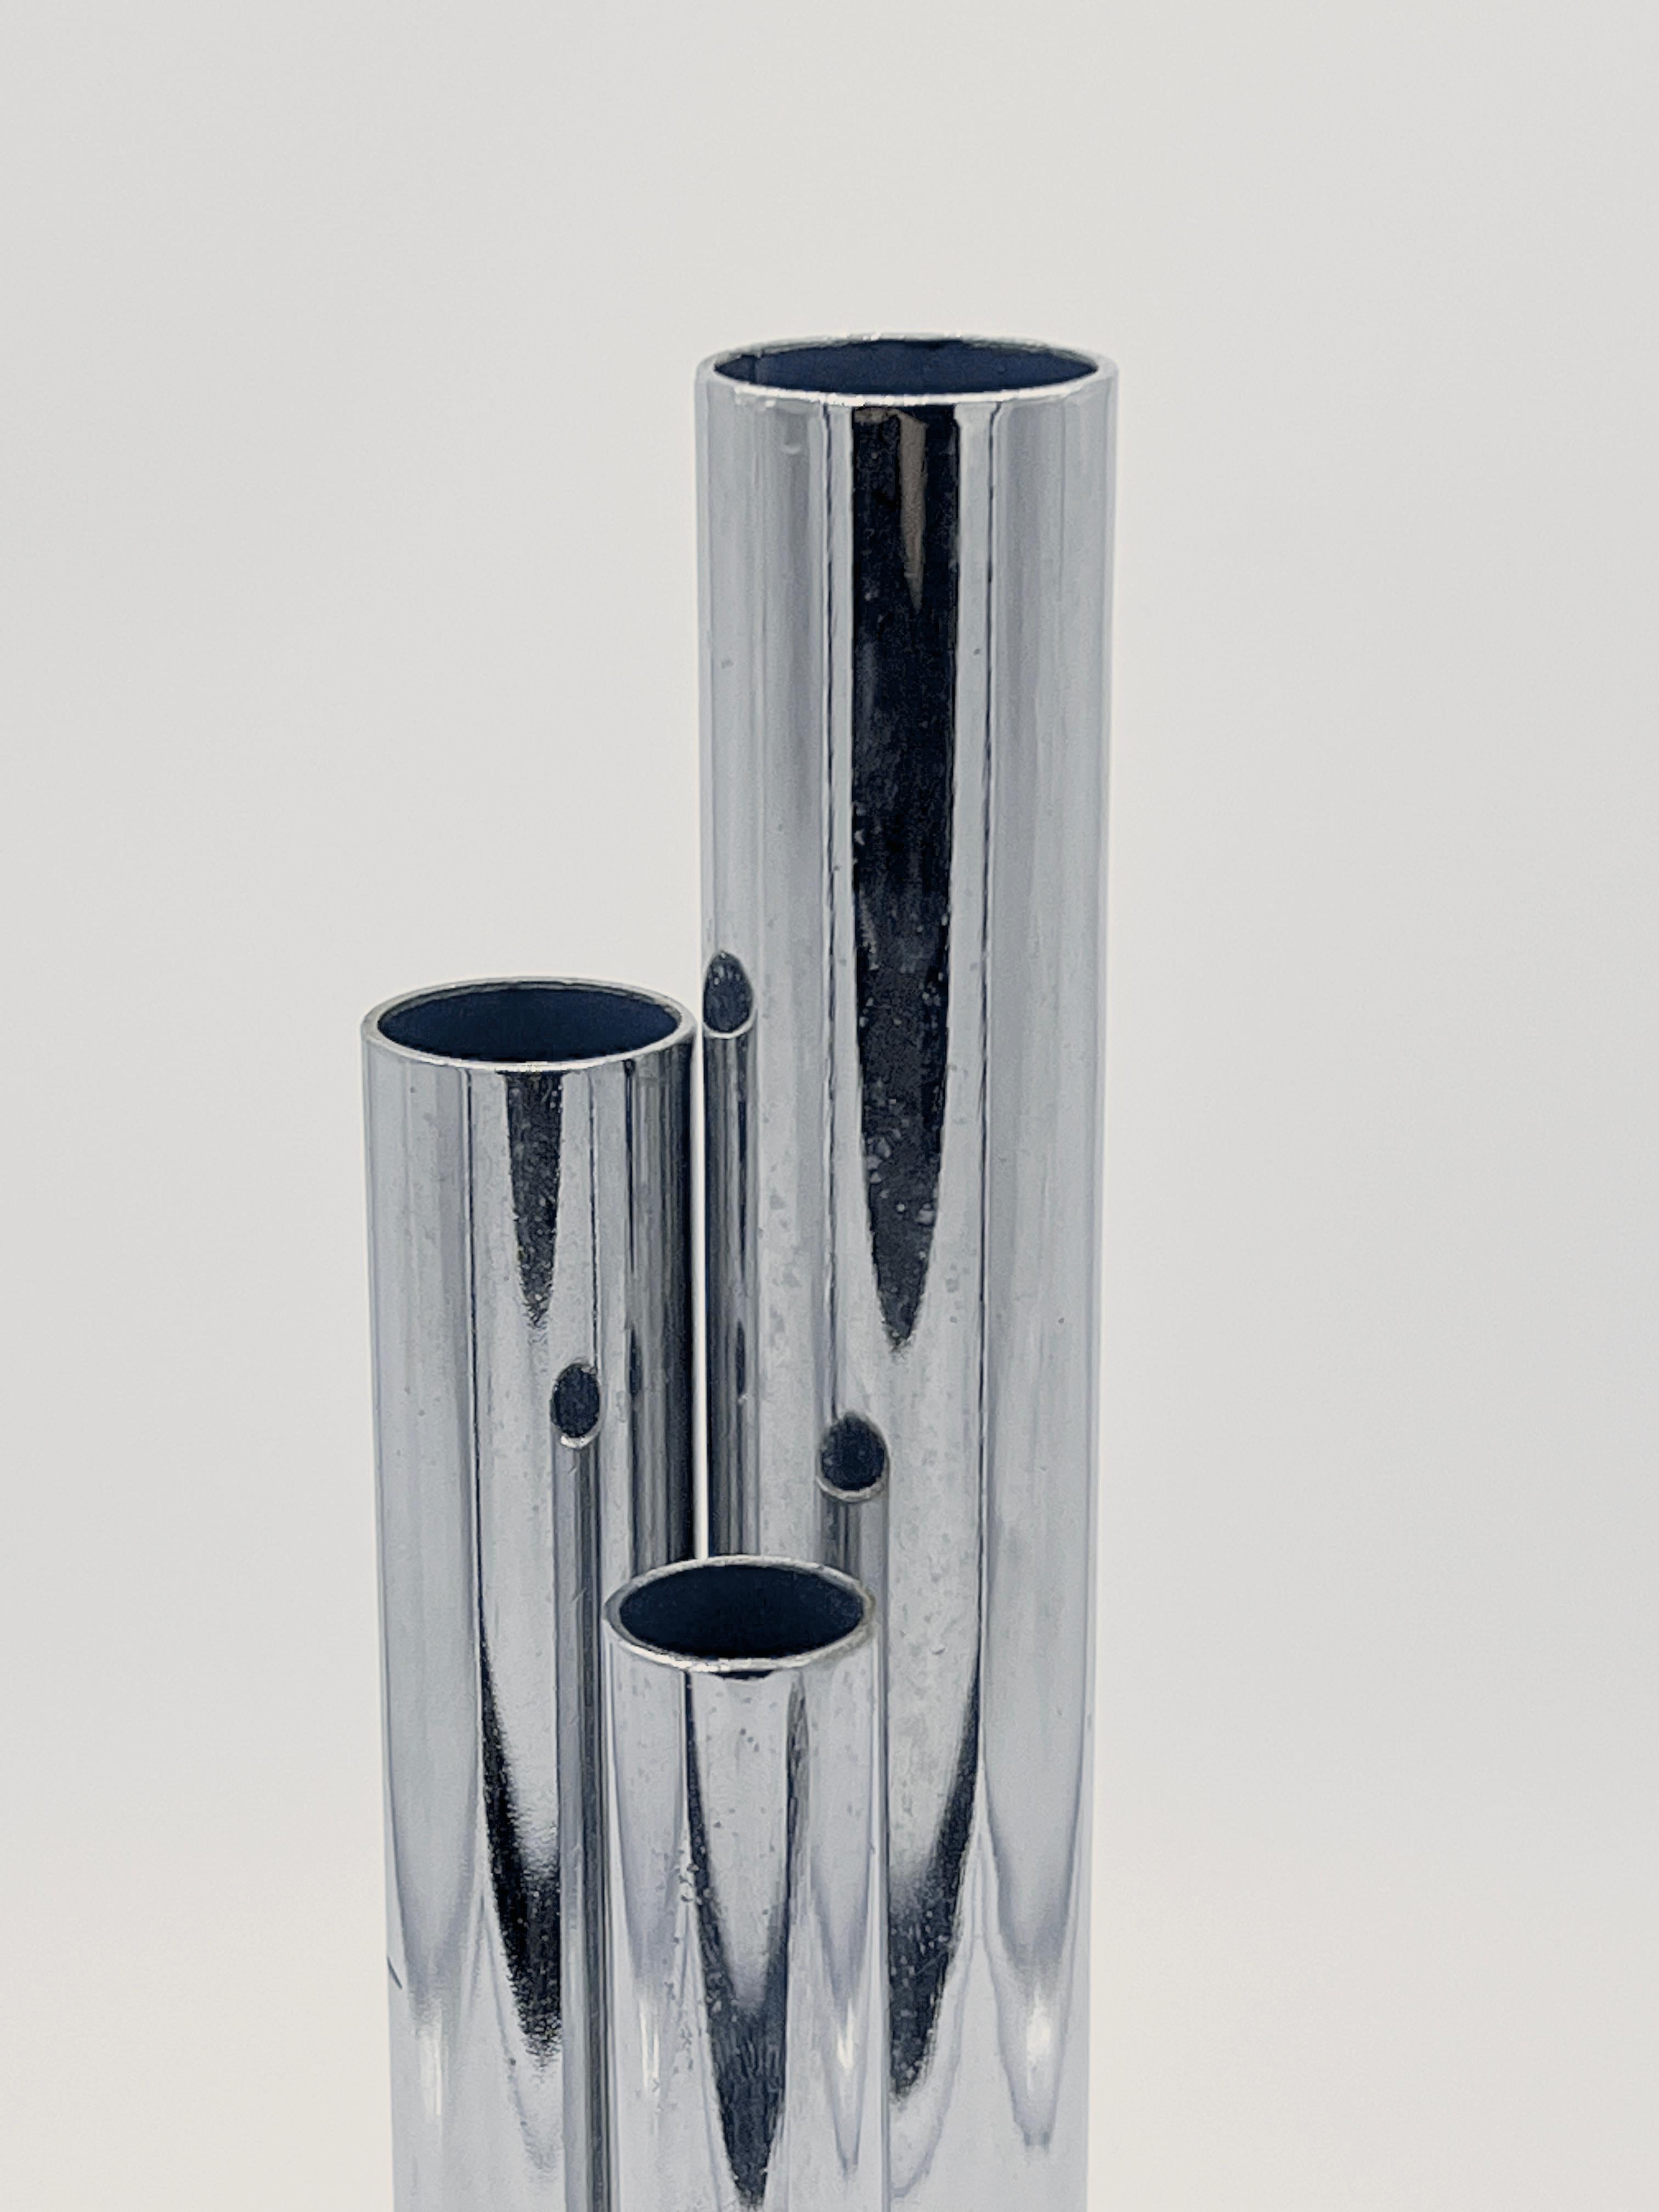 Vintage Mid-Century Modern Italian vase/pen holder, made in chromed metal and designed in the style of Gio Ponti for Krupp. The three pipes have different lenghts, and can each hold one flower or a couple pens. Diameter of the single tube is around